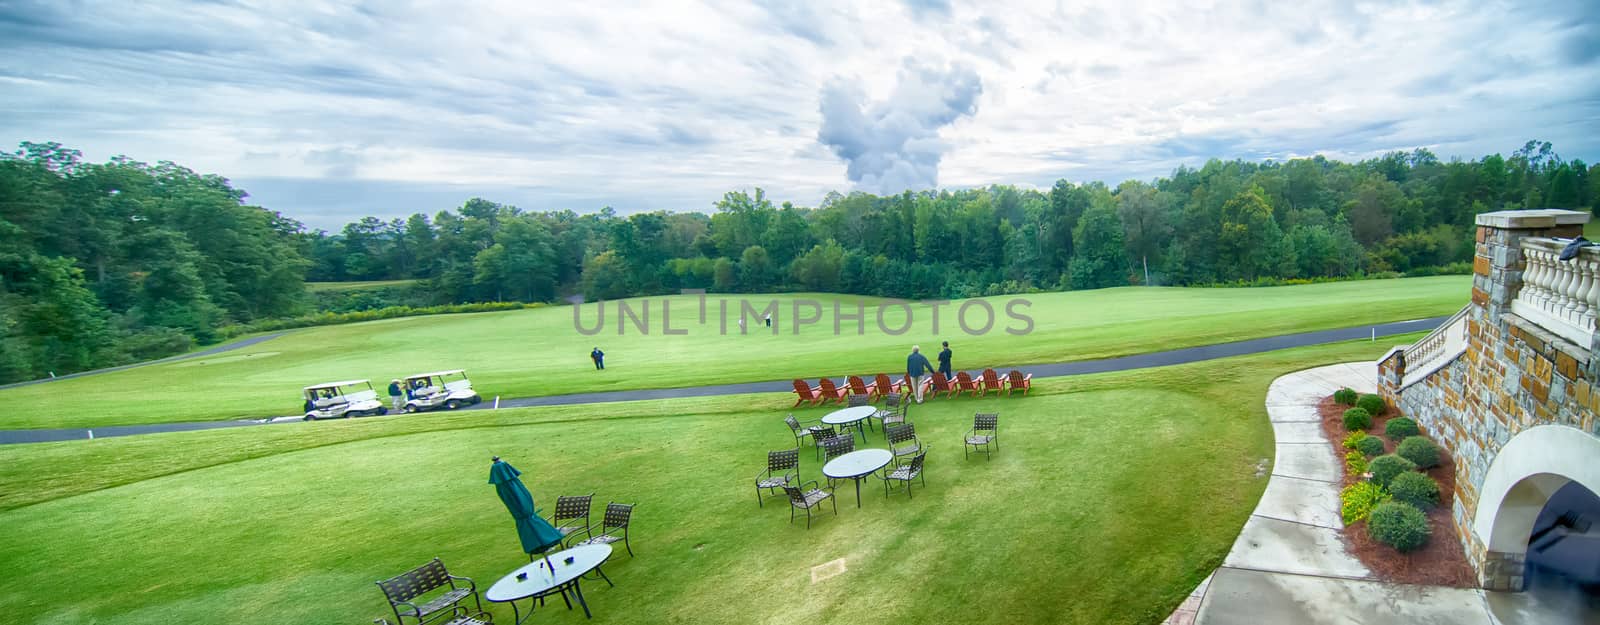 luxurious golf course on a cloudy day by digidreamgrafix